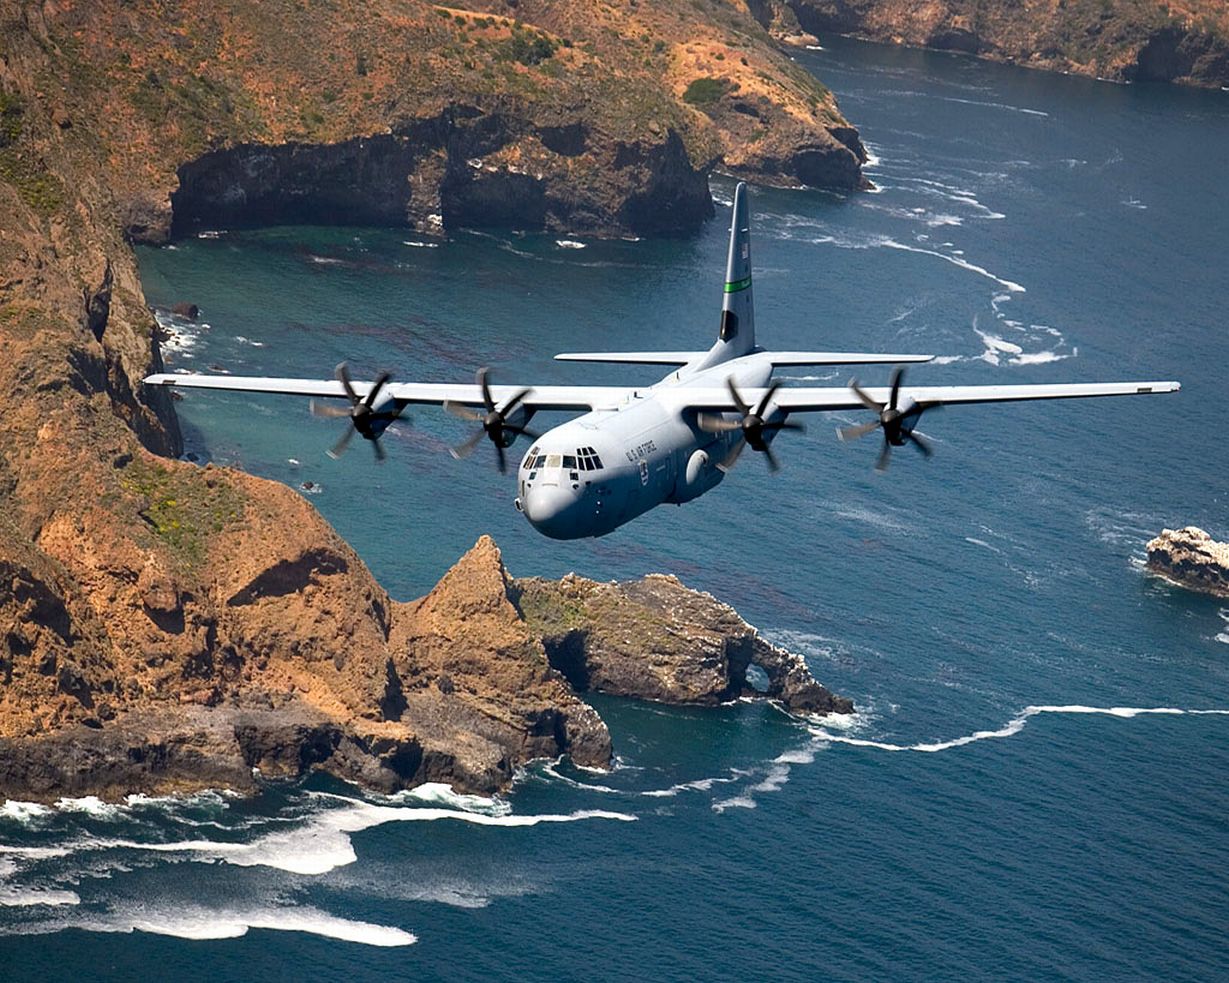 c130 does anyone have 130 high resolution #9pTi